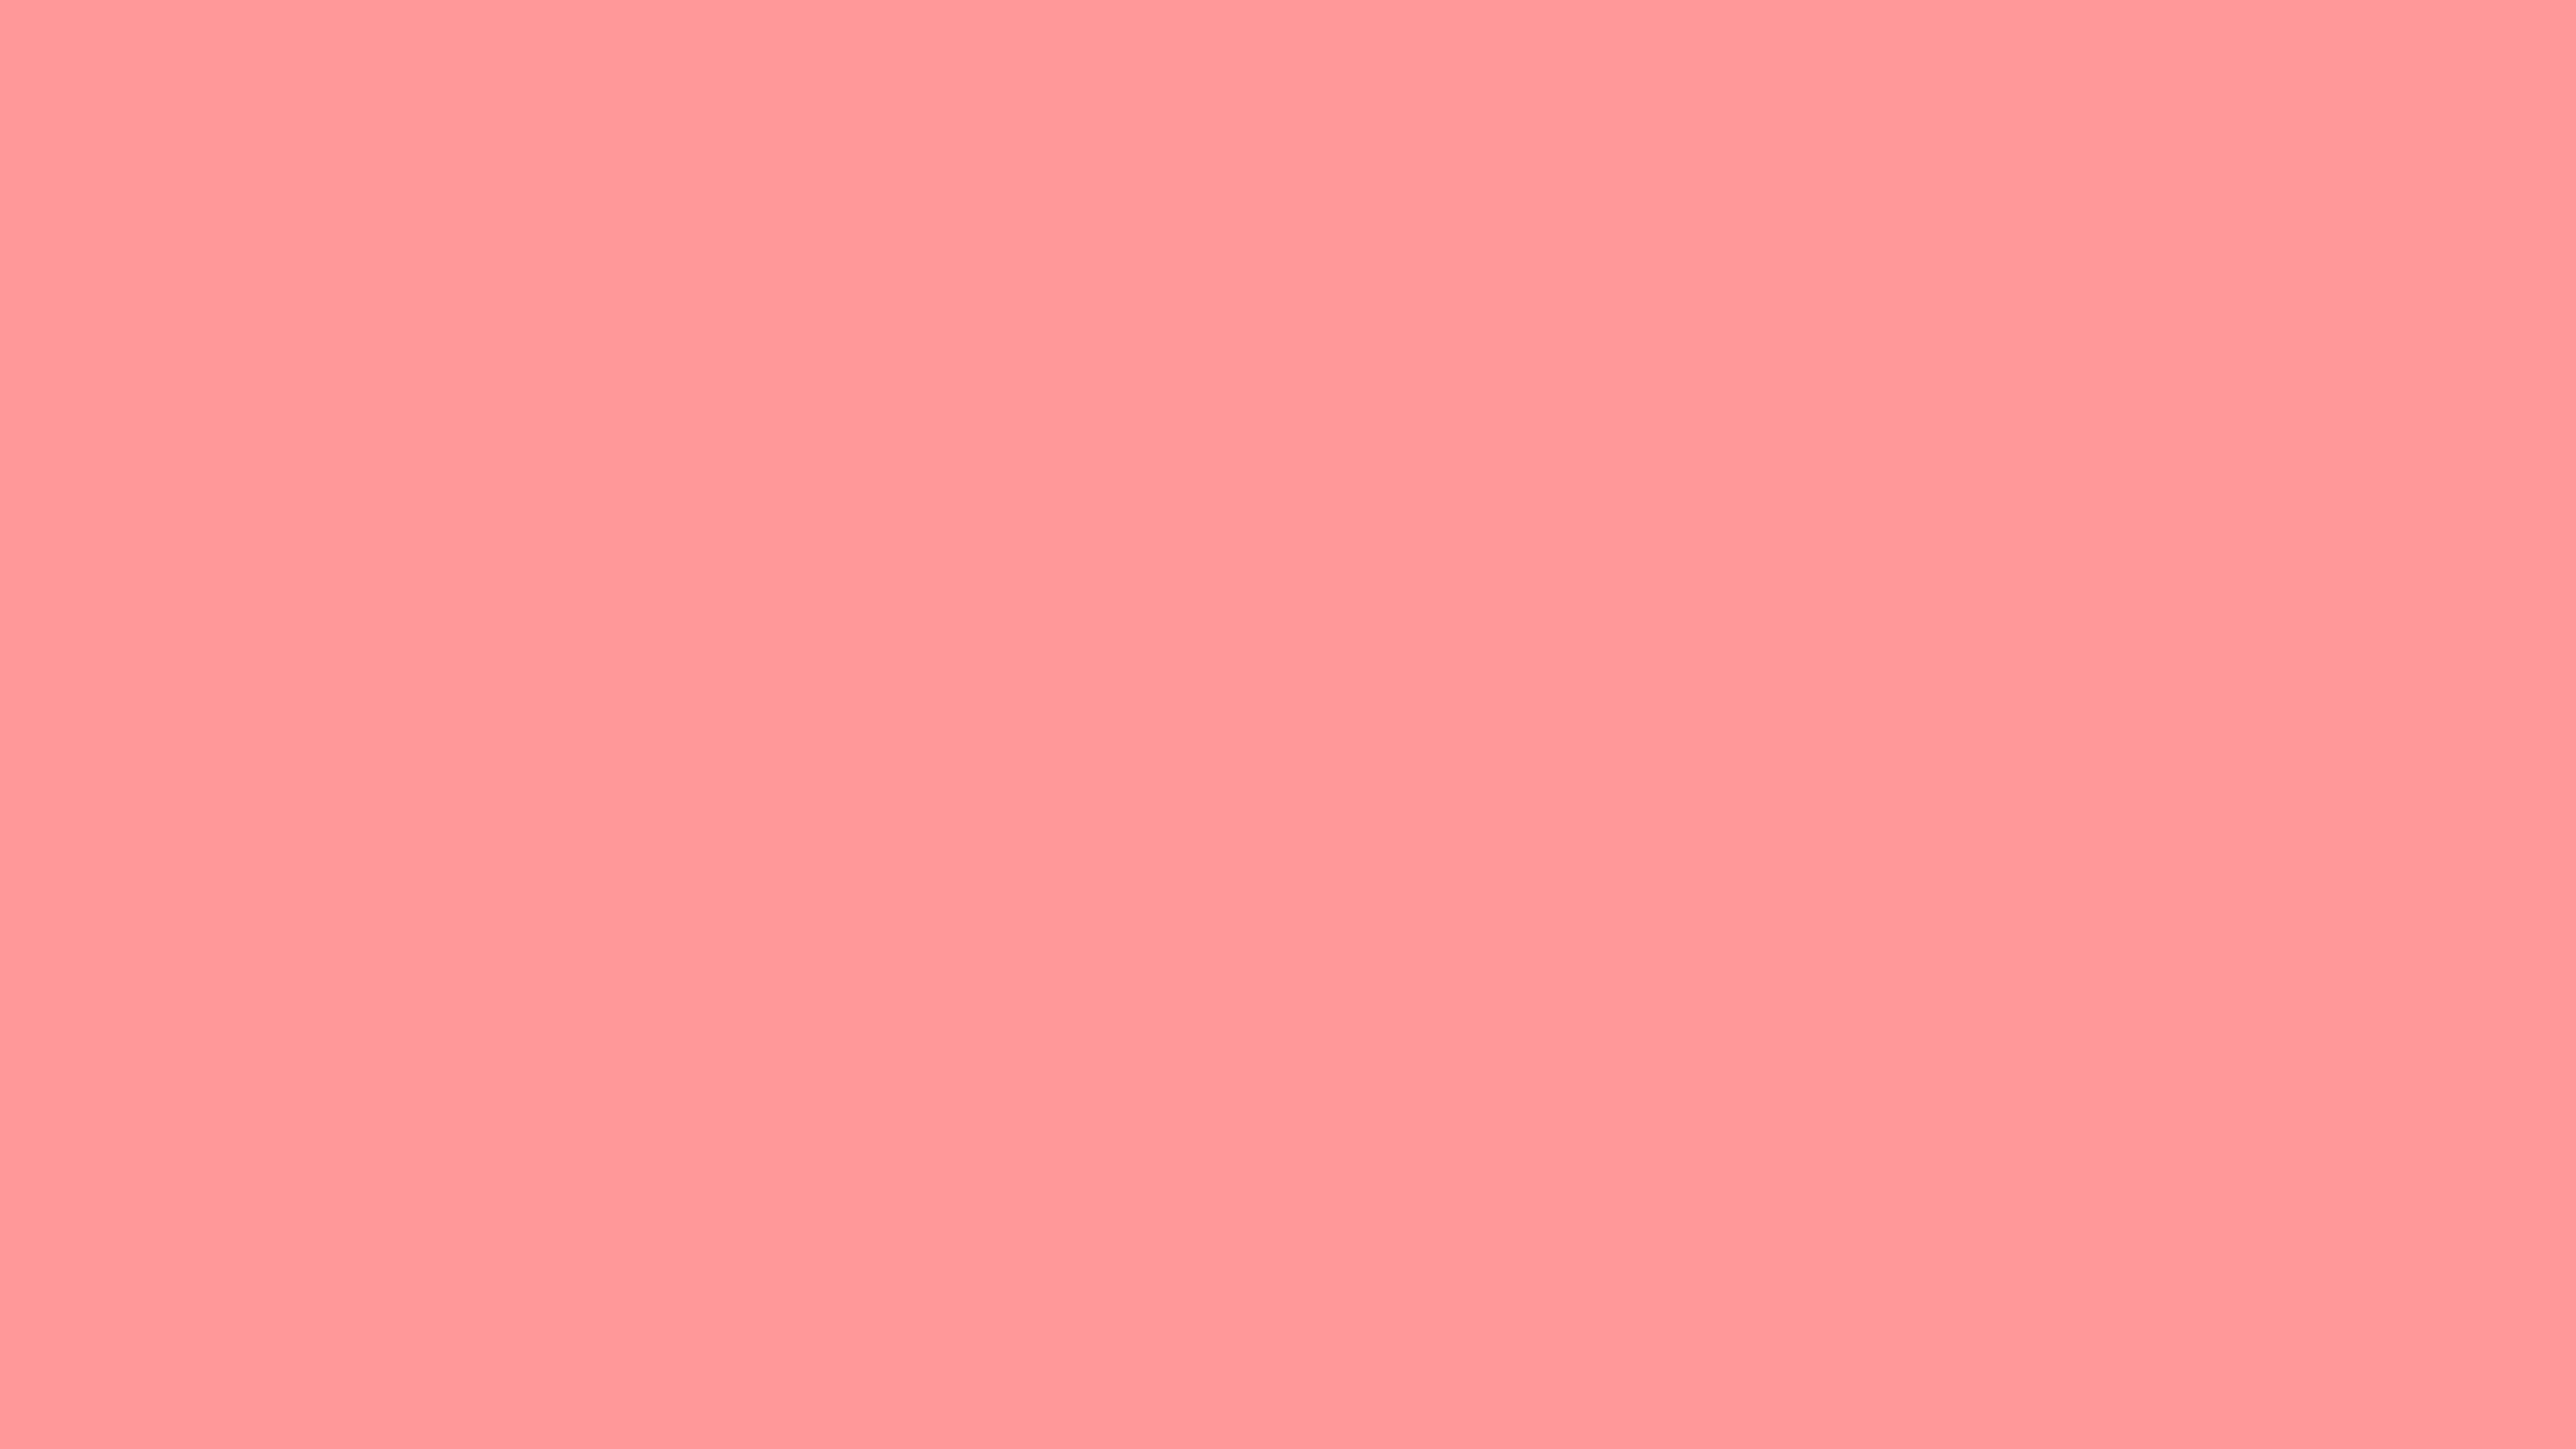 4096x2304 Light Salmon Pink Solid Color Background